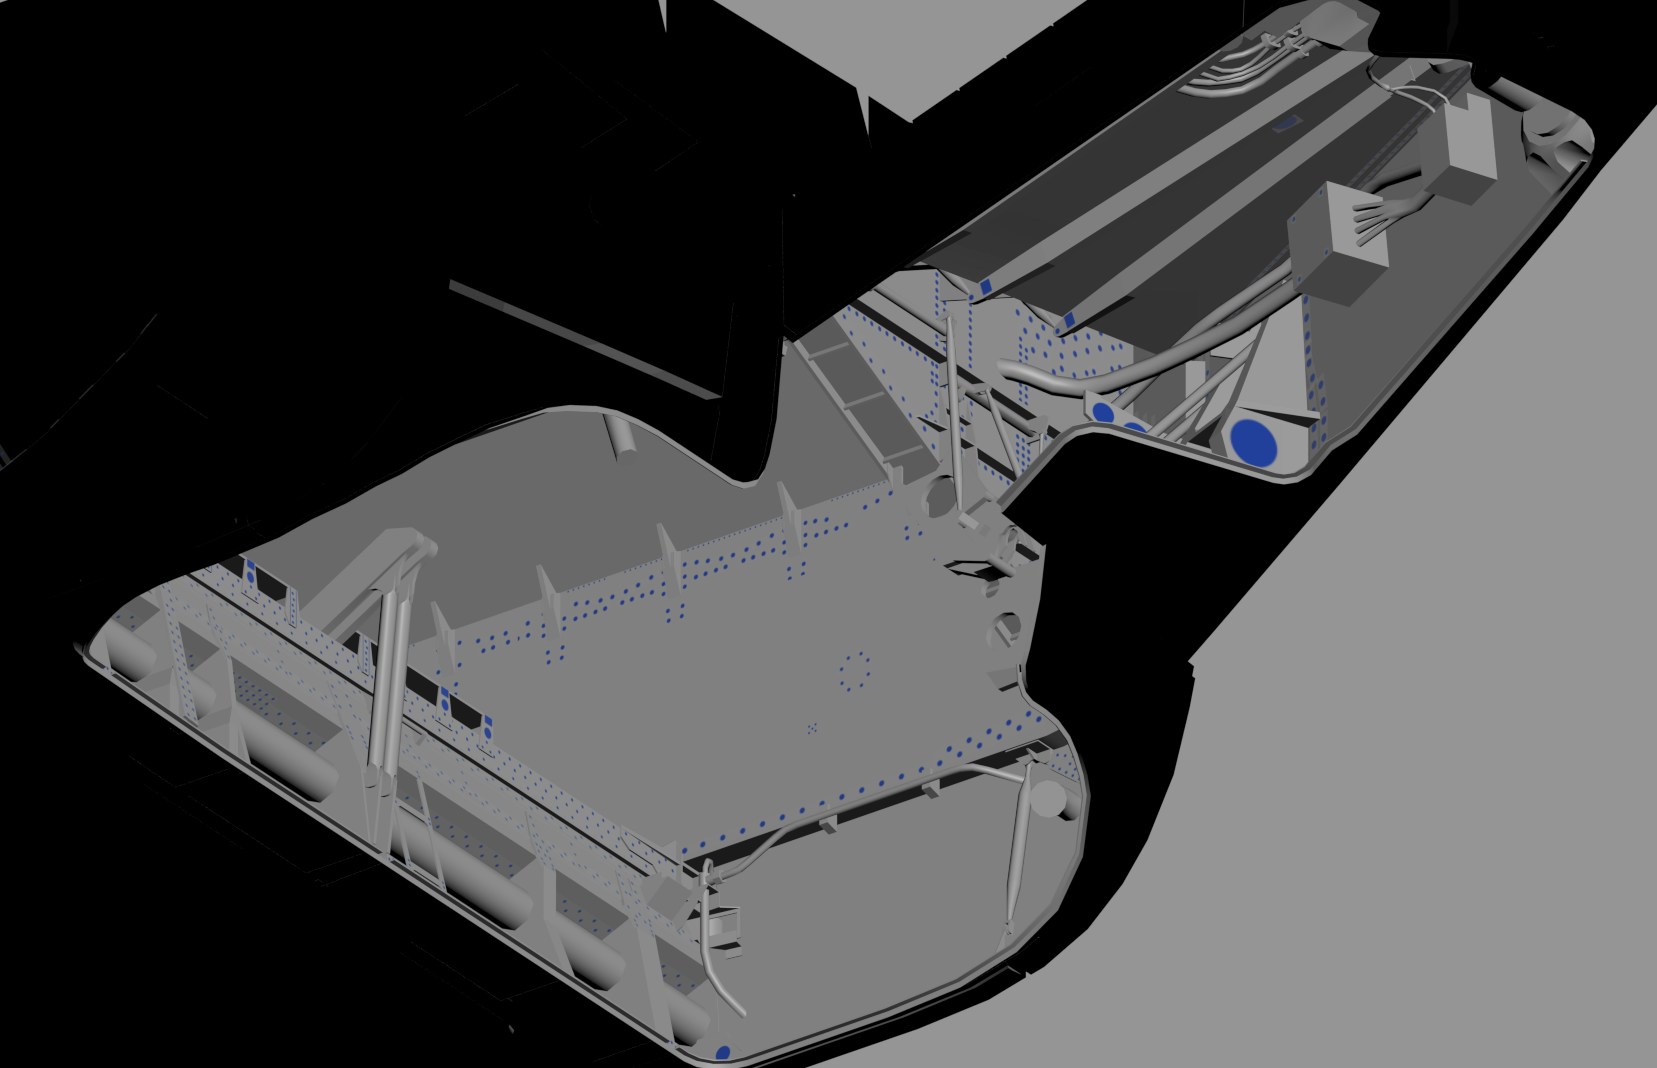 Aerosoft Aircraft A330 SimBrief Integration Preview and New Renders